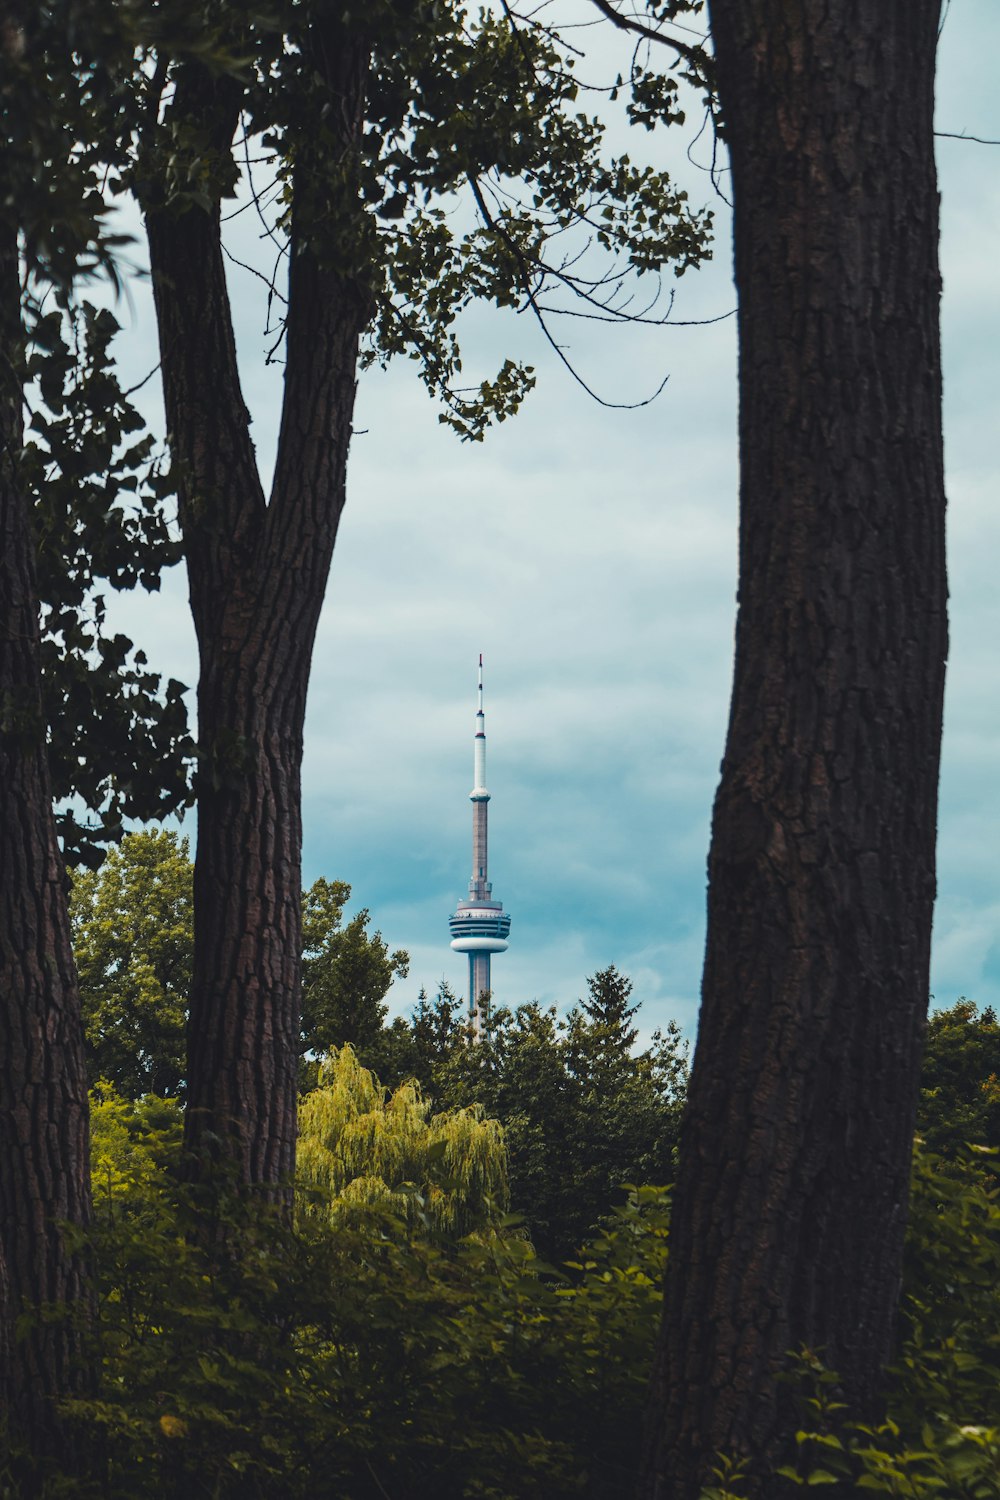 a view of a tower through some trees